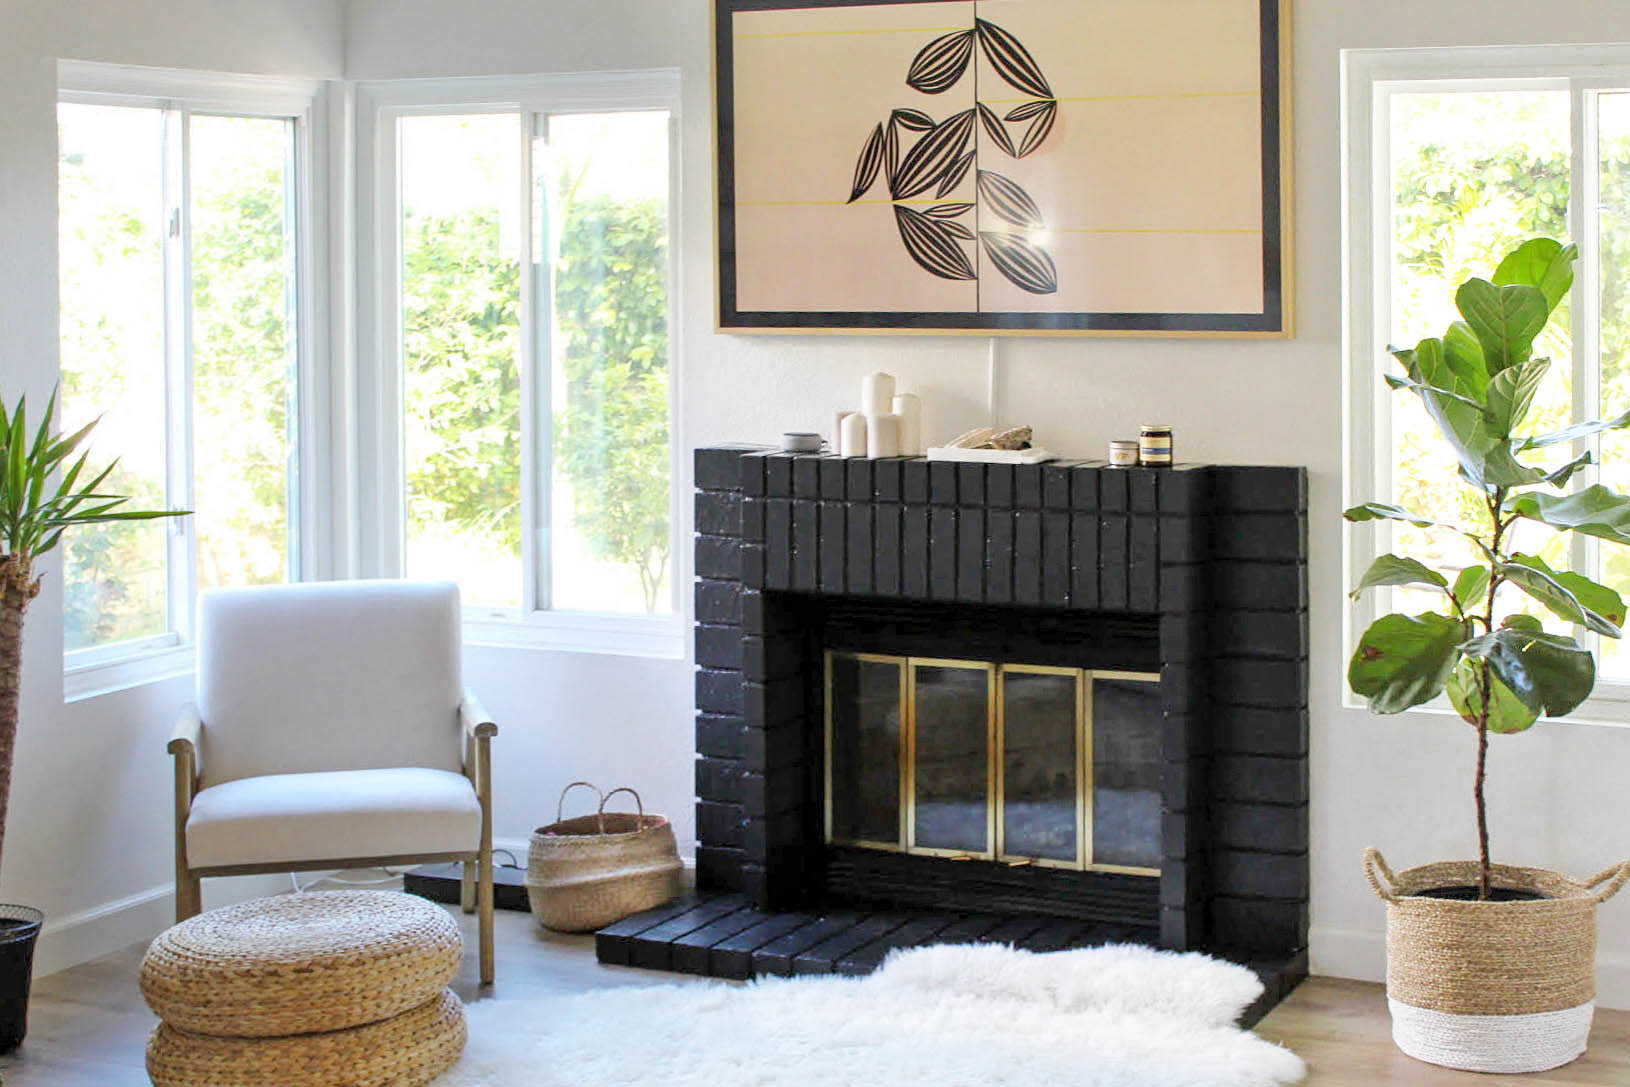 How To Strip Paint Off Brick Fireplace